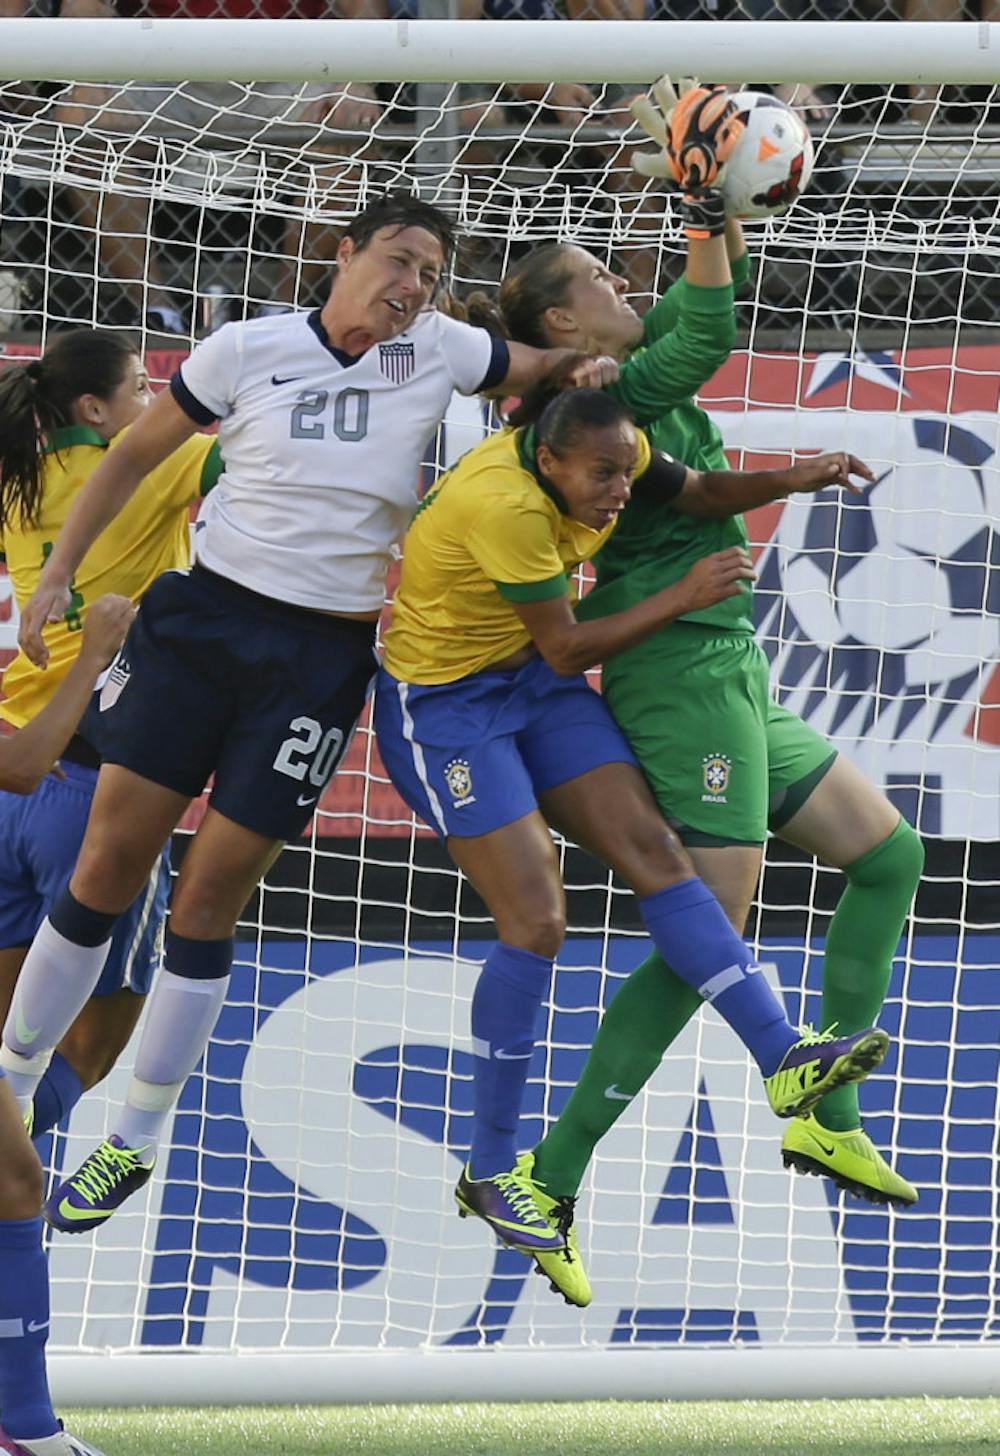 <p>U.S. forward Abby Wambach (20) tries to head the ball in the goal during the first half of an international friendly soccer match against Brazil in Orlando on Sunday.</p>